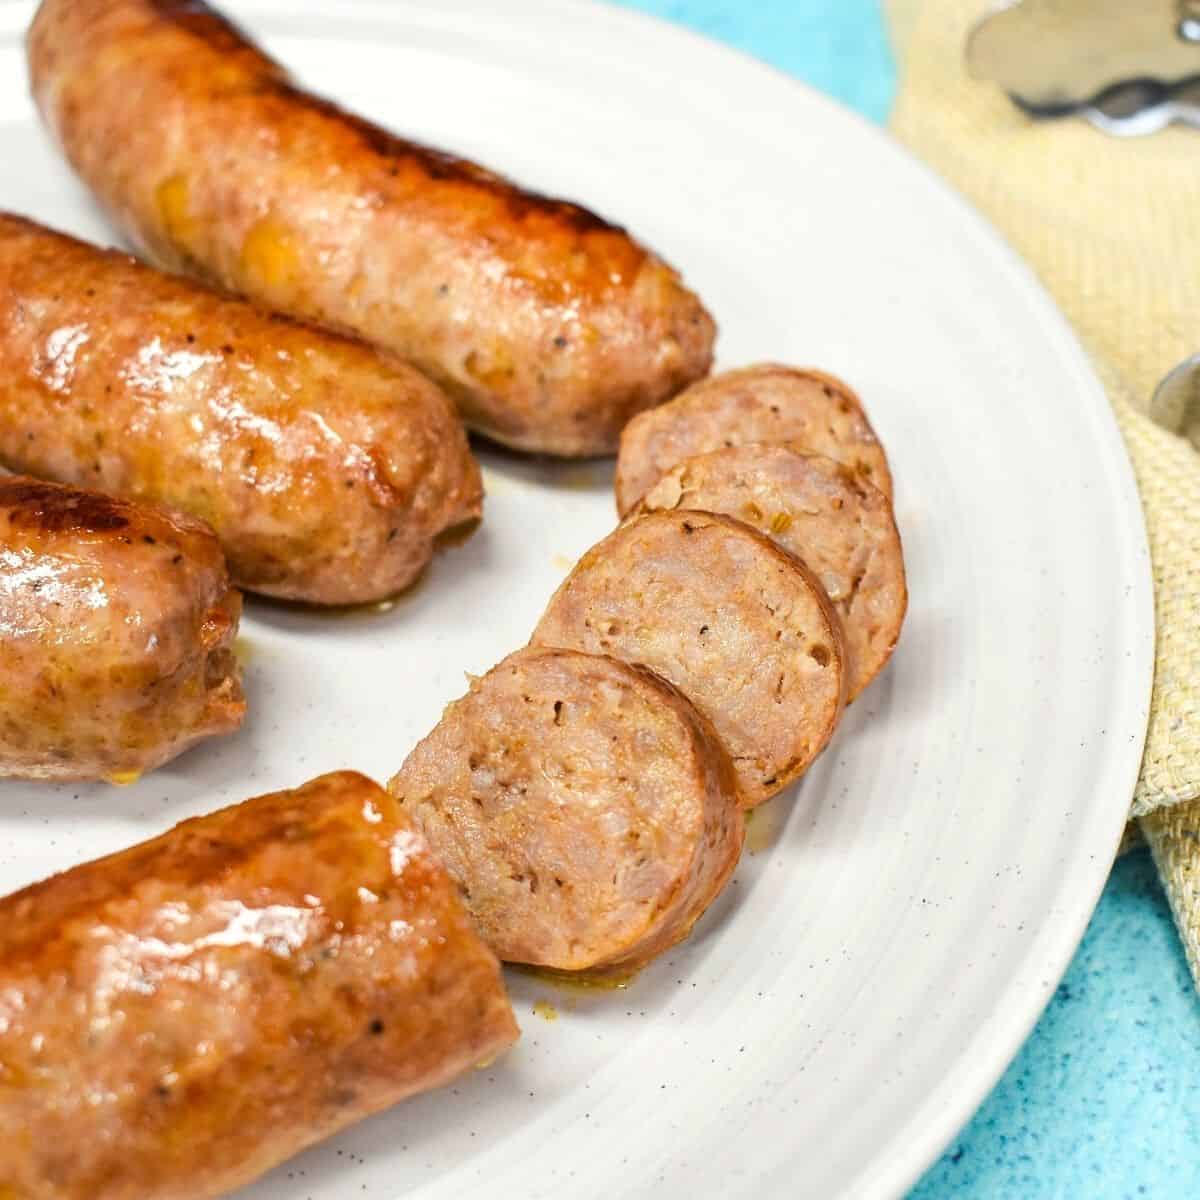 Close-up image of sausage served on a white plate. A portion of a sausage cut into bite-sized pieces.